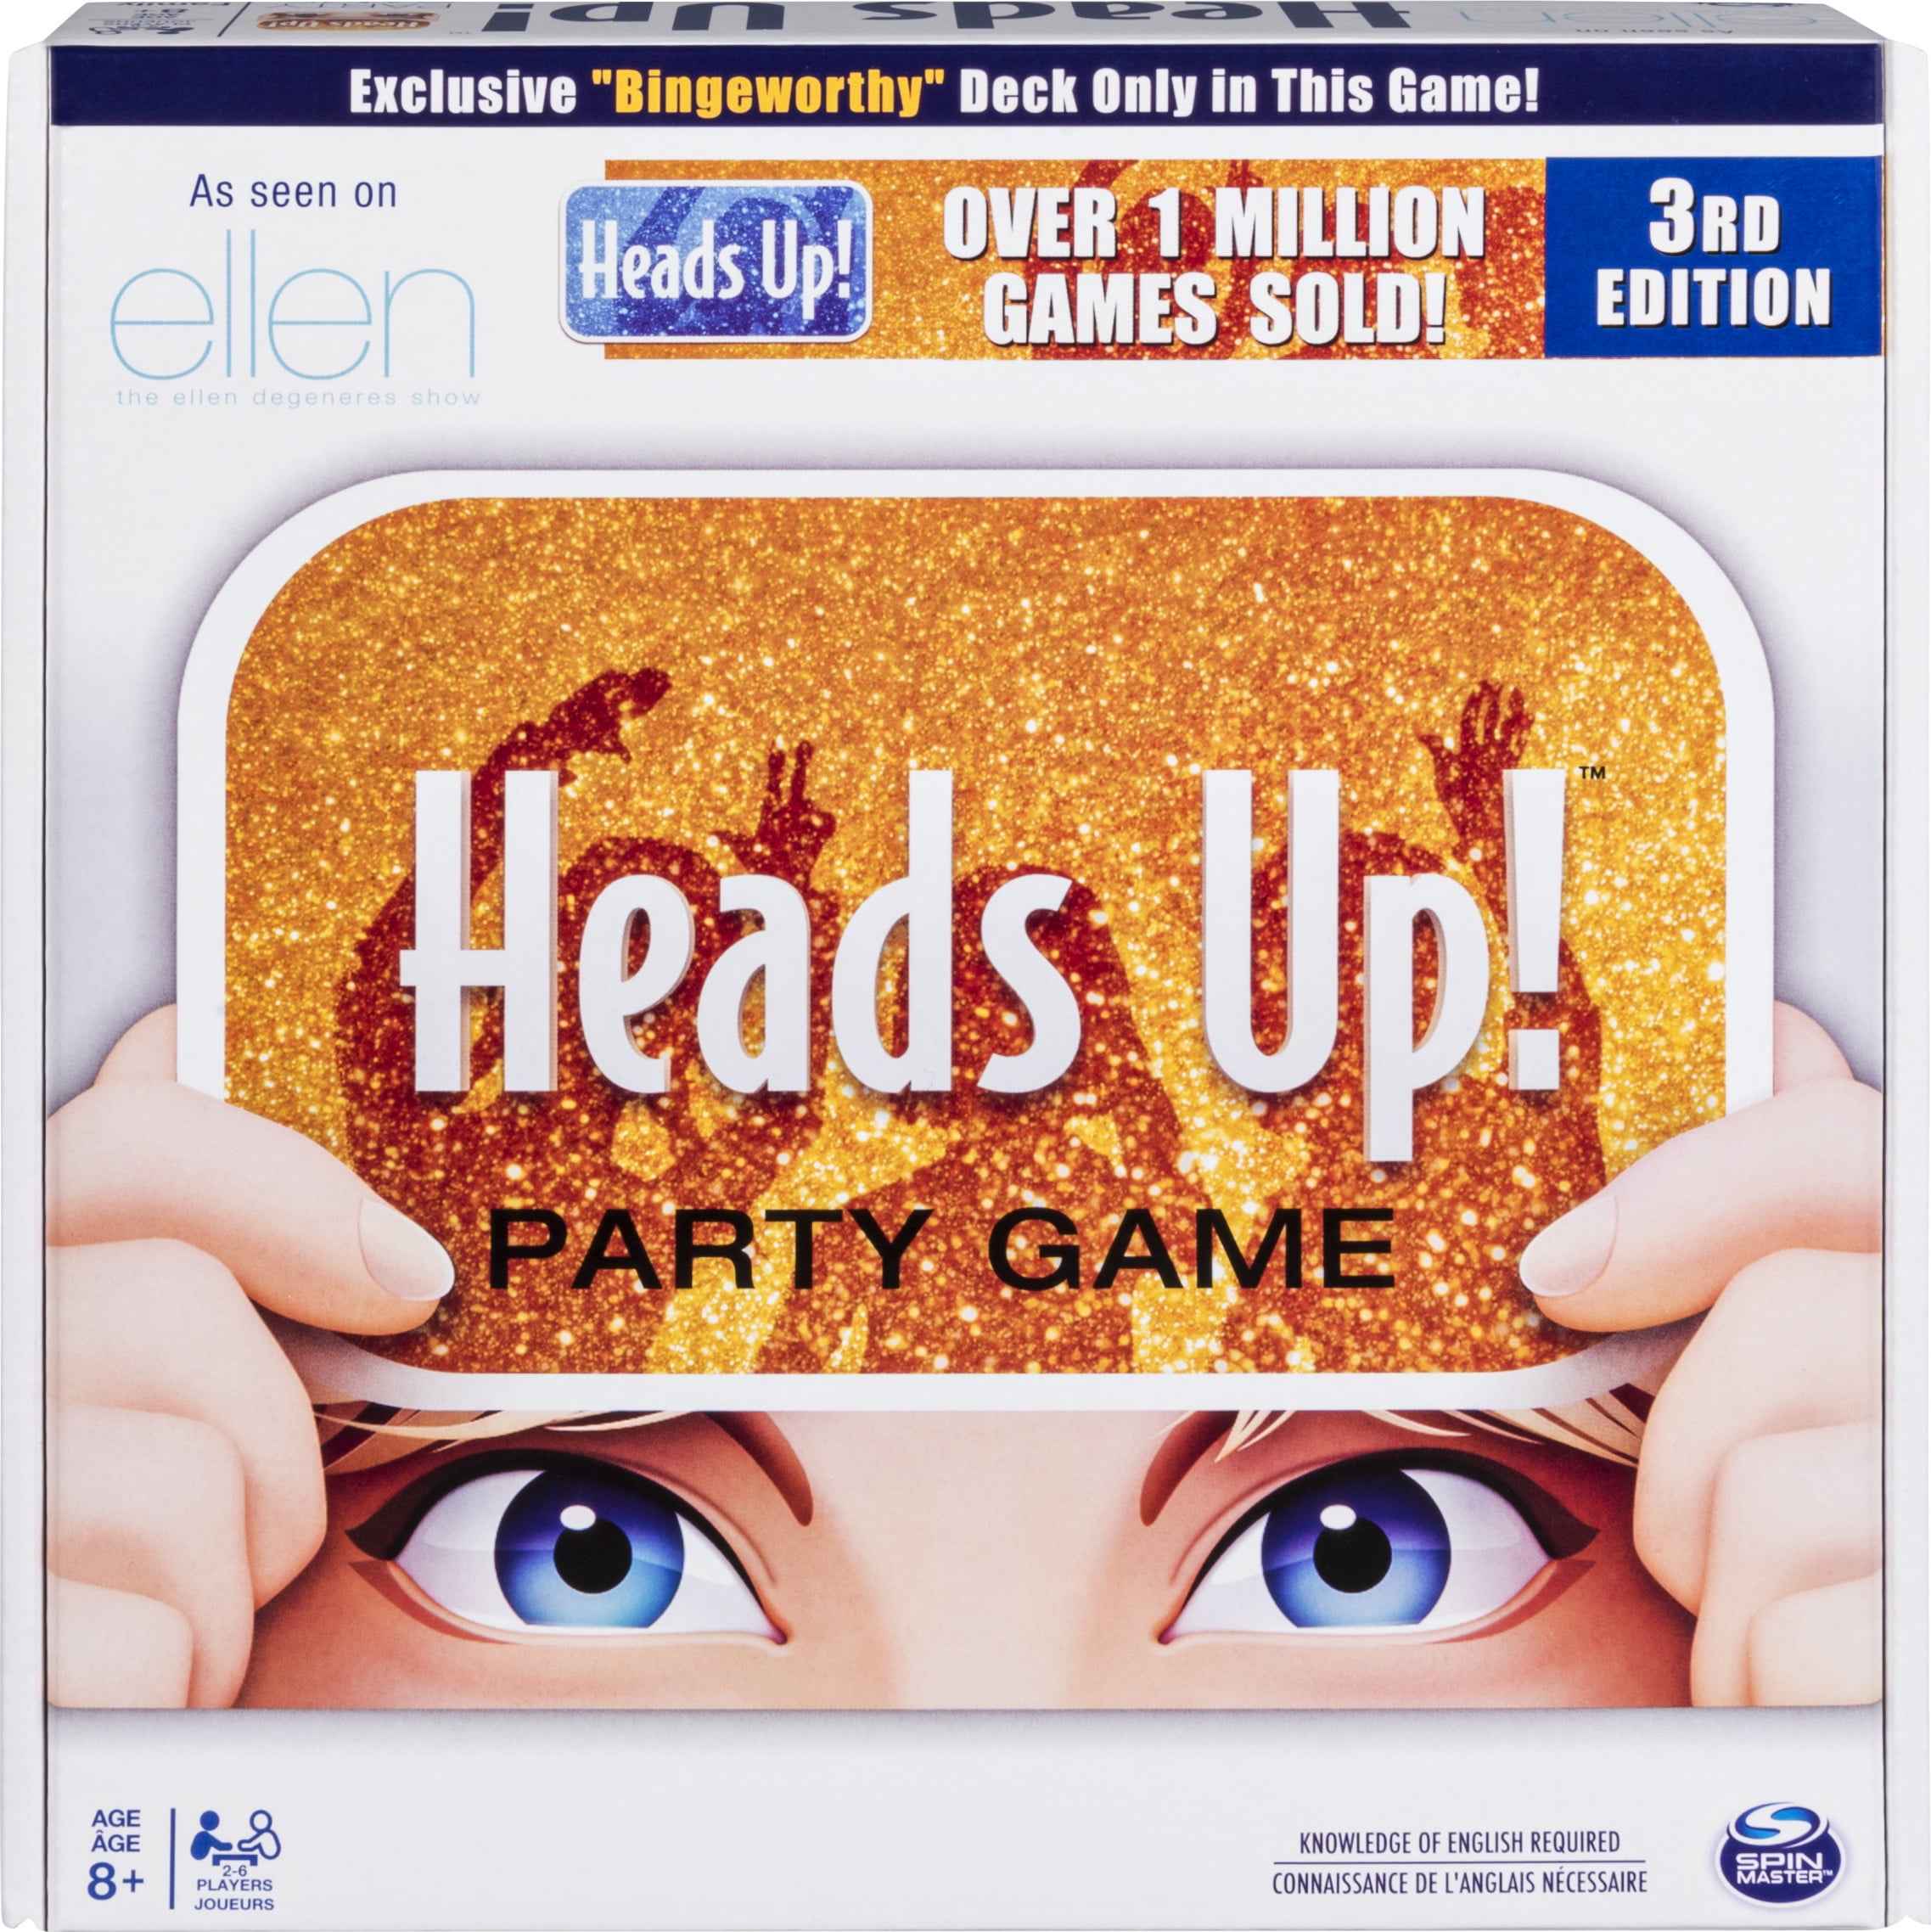 NEW Celebrity Heads "Head" Game Family Friendly Fun Ages 12 Party Kids Gift Box 